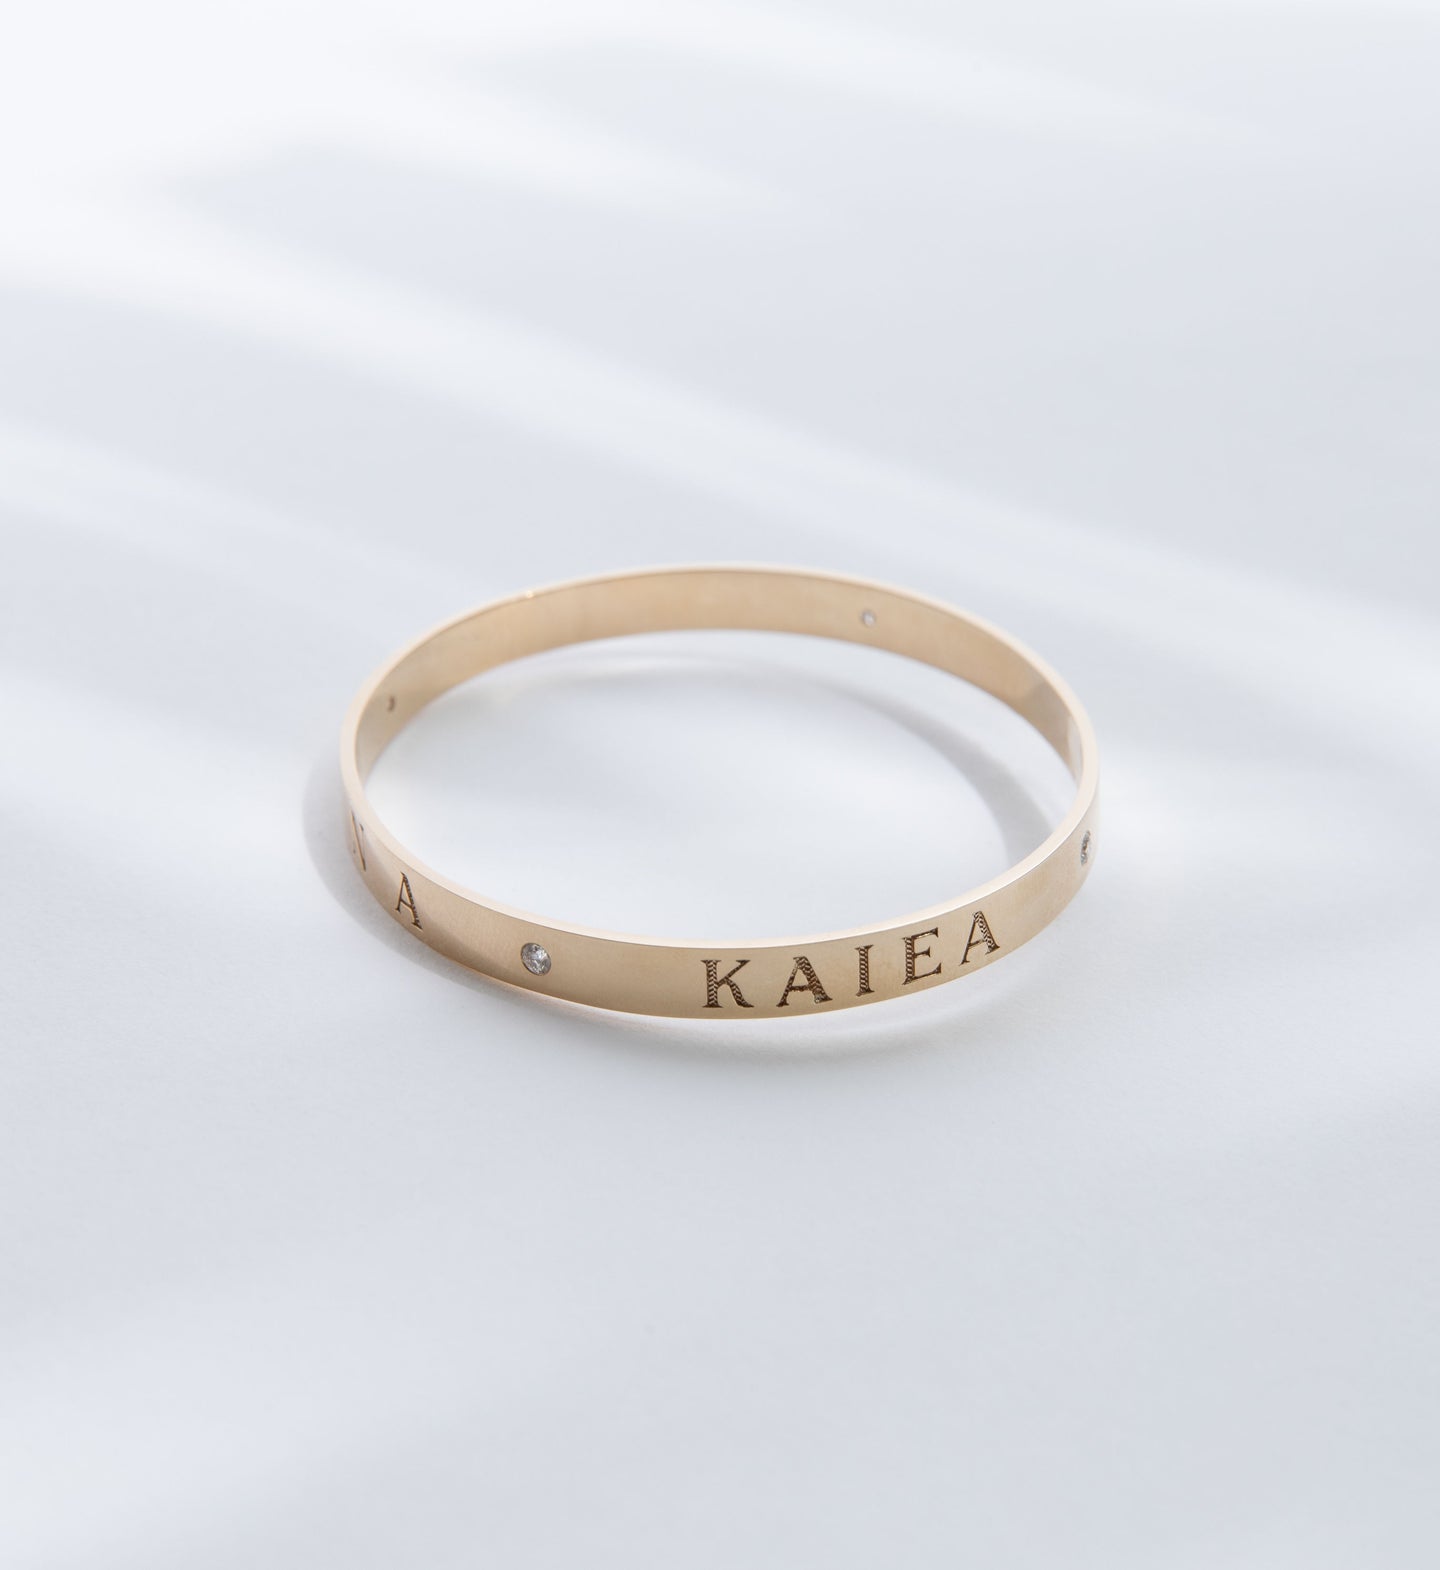 Hie Aloha Nui bangle bracelet in gold, engraved with the name Kaiea and including diamond accents